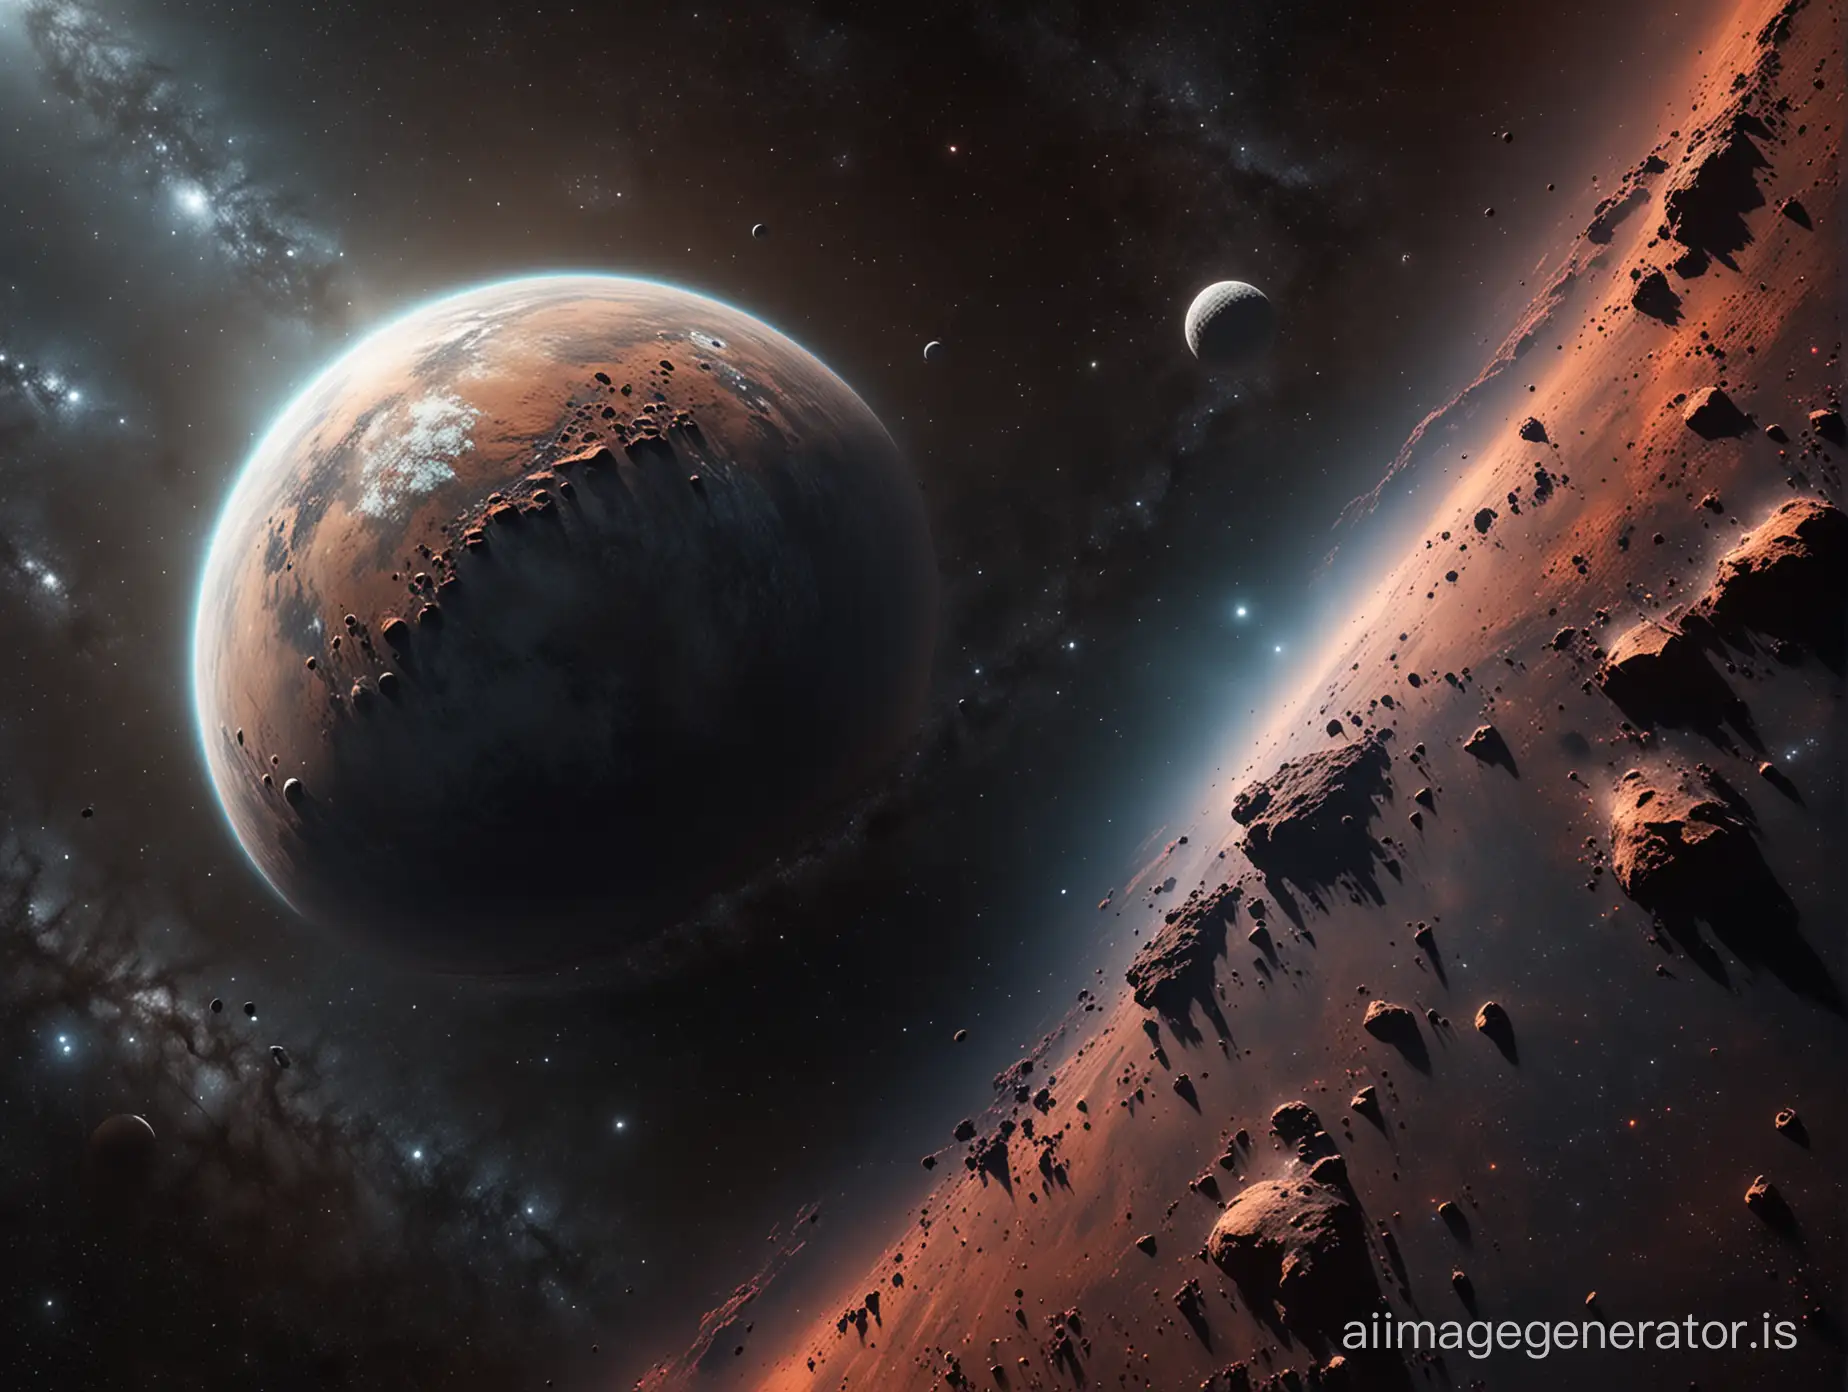 Stellar-Vista-Panoramic-Photorealistic-View-of-Alpha-Cassiopeiaes-Second-Planet